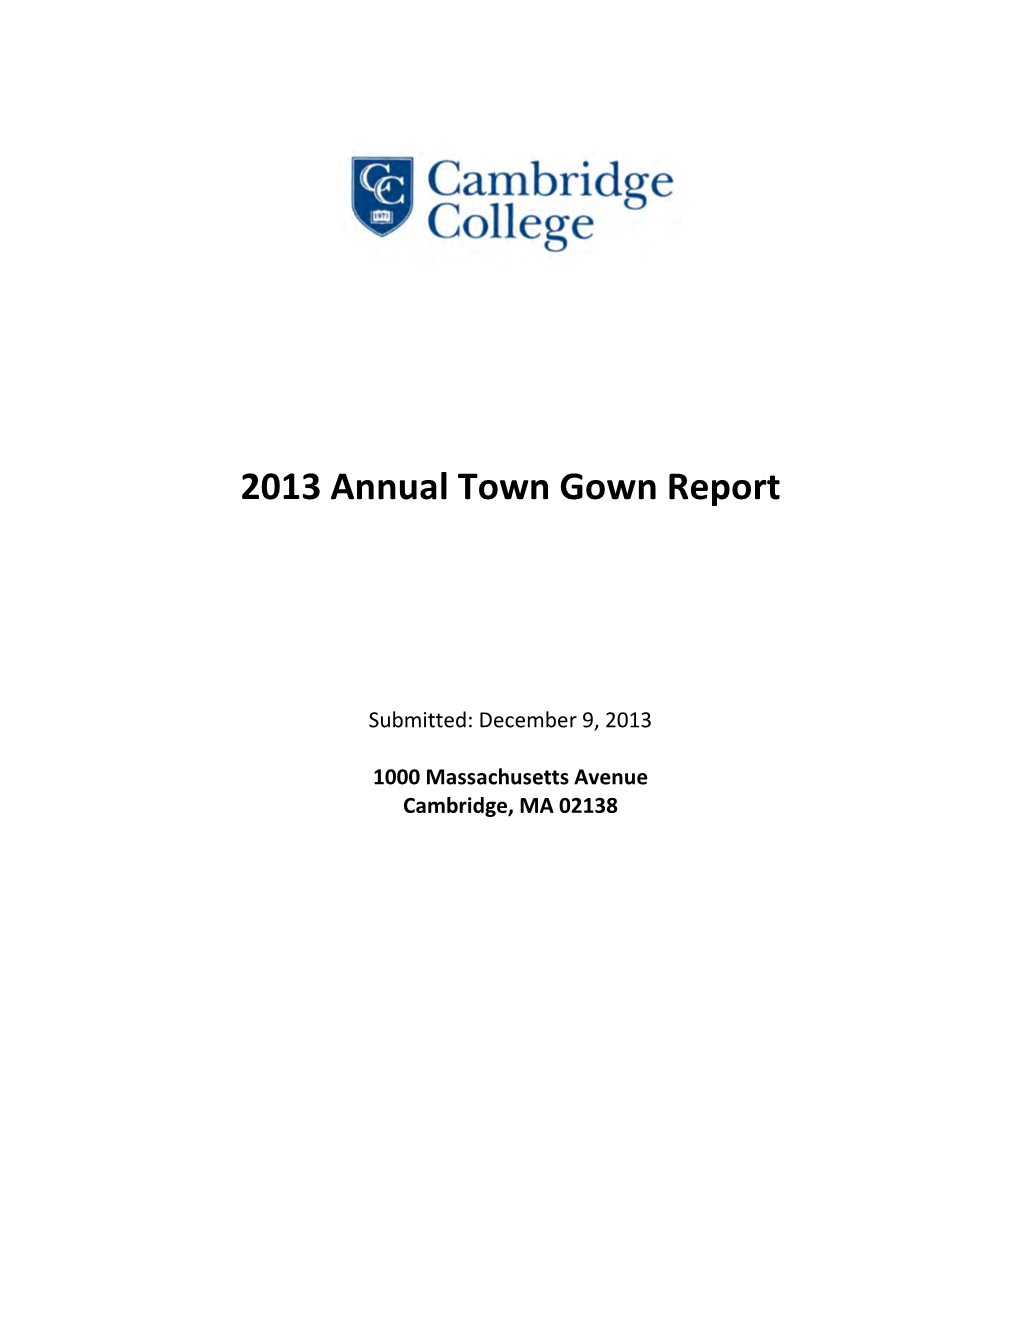 Cambridge College 2013 Town Gown Report